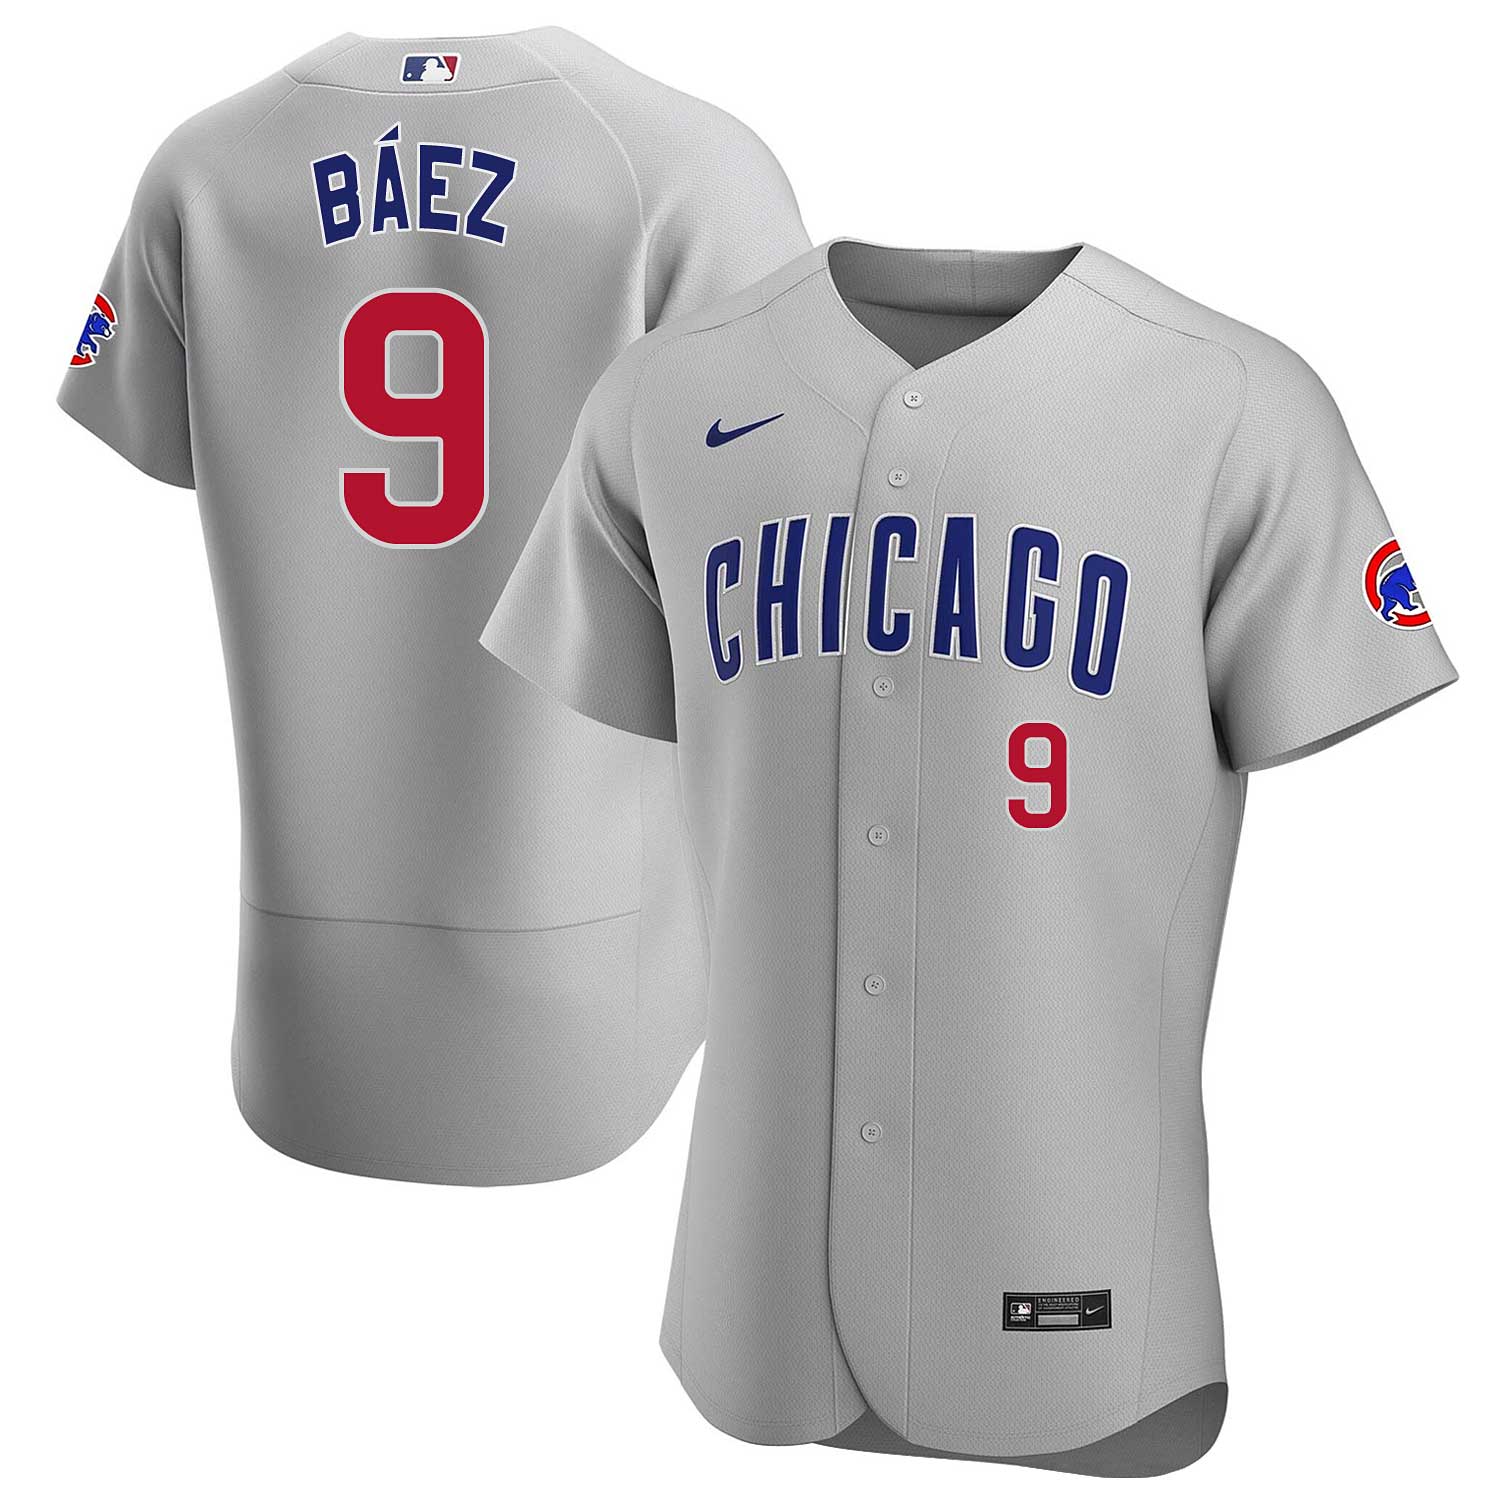 Shirts & Tops, Mlb Chicago Cubs Jersey Youth Size Large 9 Javier Baez  Buttons